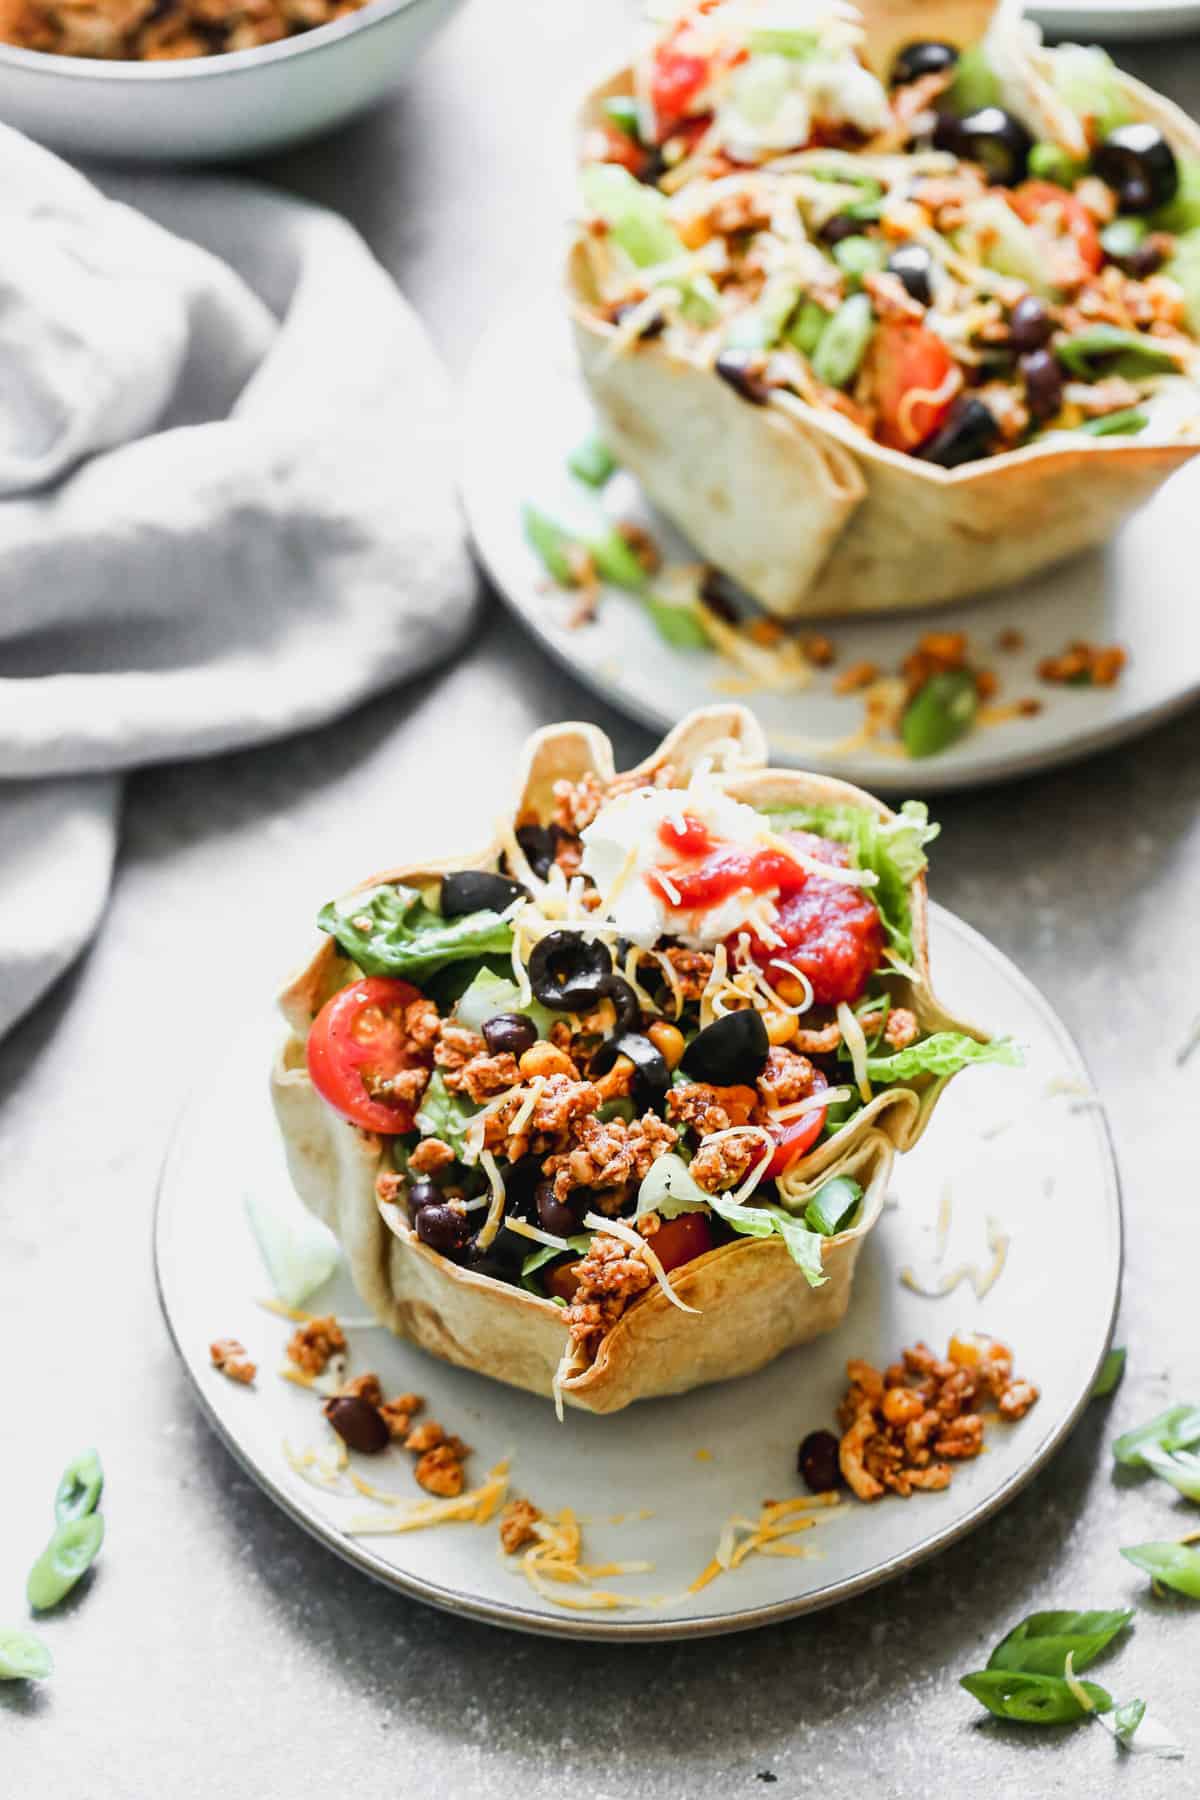 Two plates with a crunchy homemade taco bowl filled with a healthy taco salad and topped with tomatoes, olives, sour cream, and salsa.